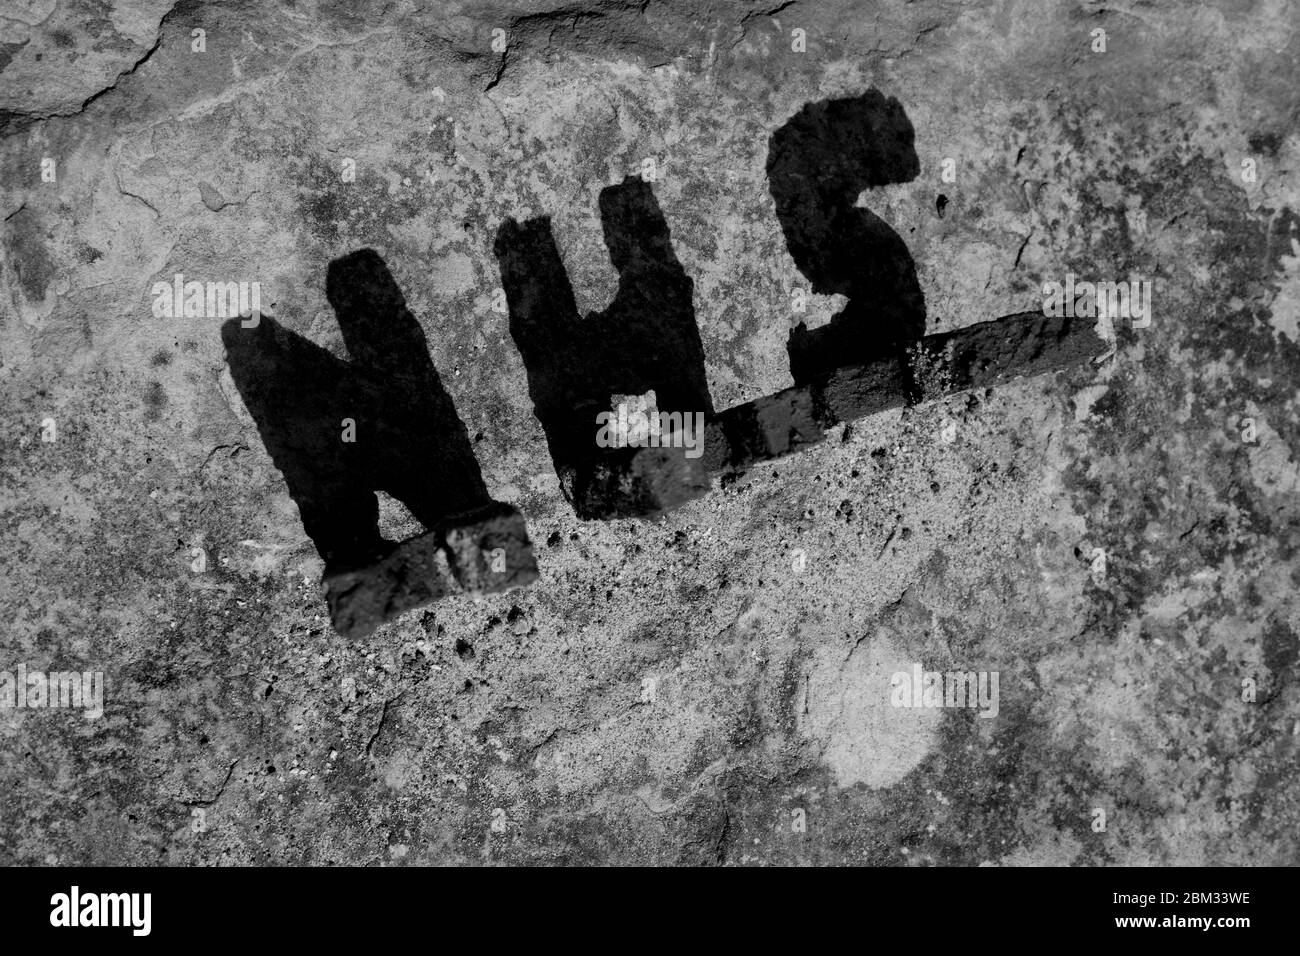 A Shadow of the Letters 'NHS', Showing the Sun Cast of the Shapes on a Rock Base with a Gritted Texture to the Stone Surface. Stock Photo